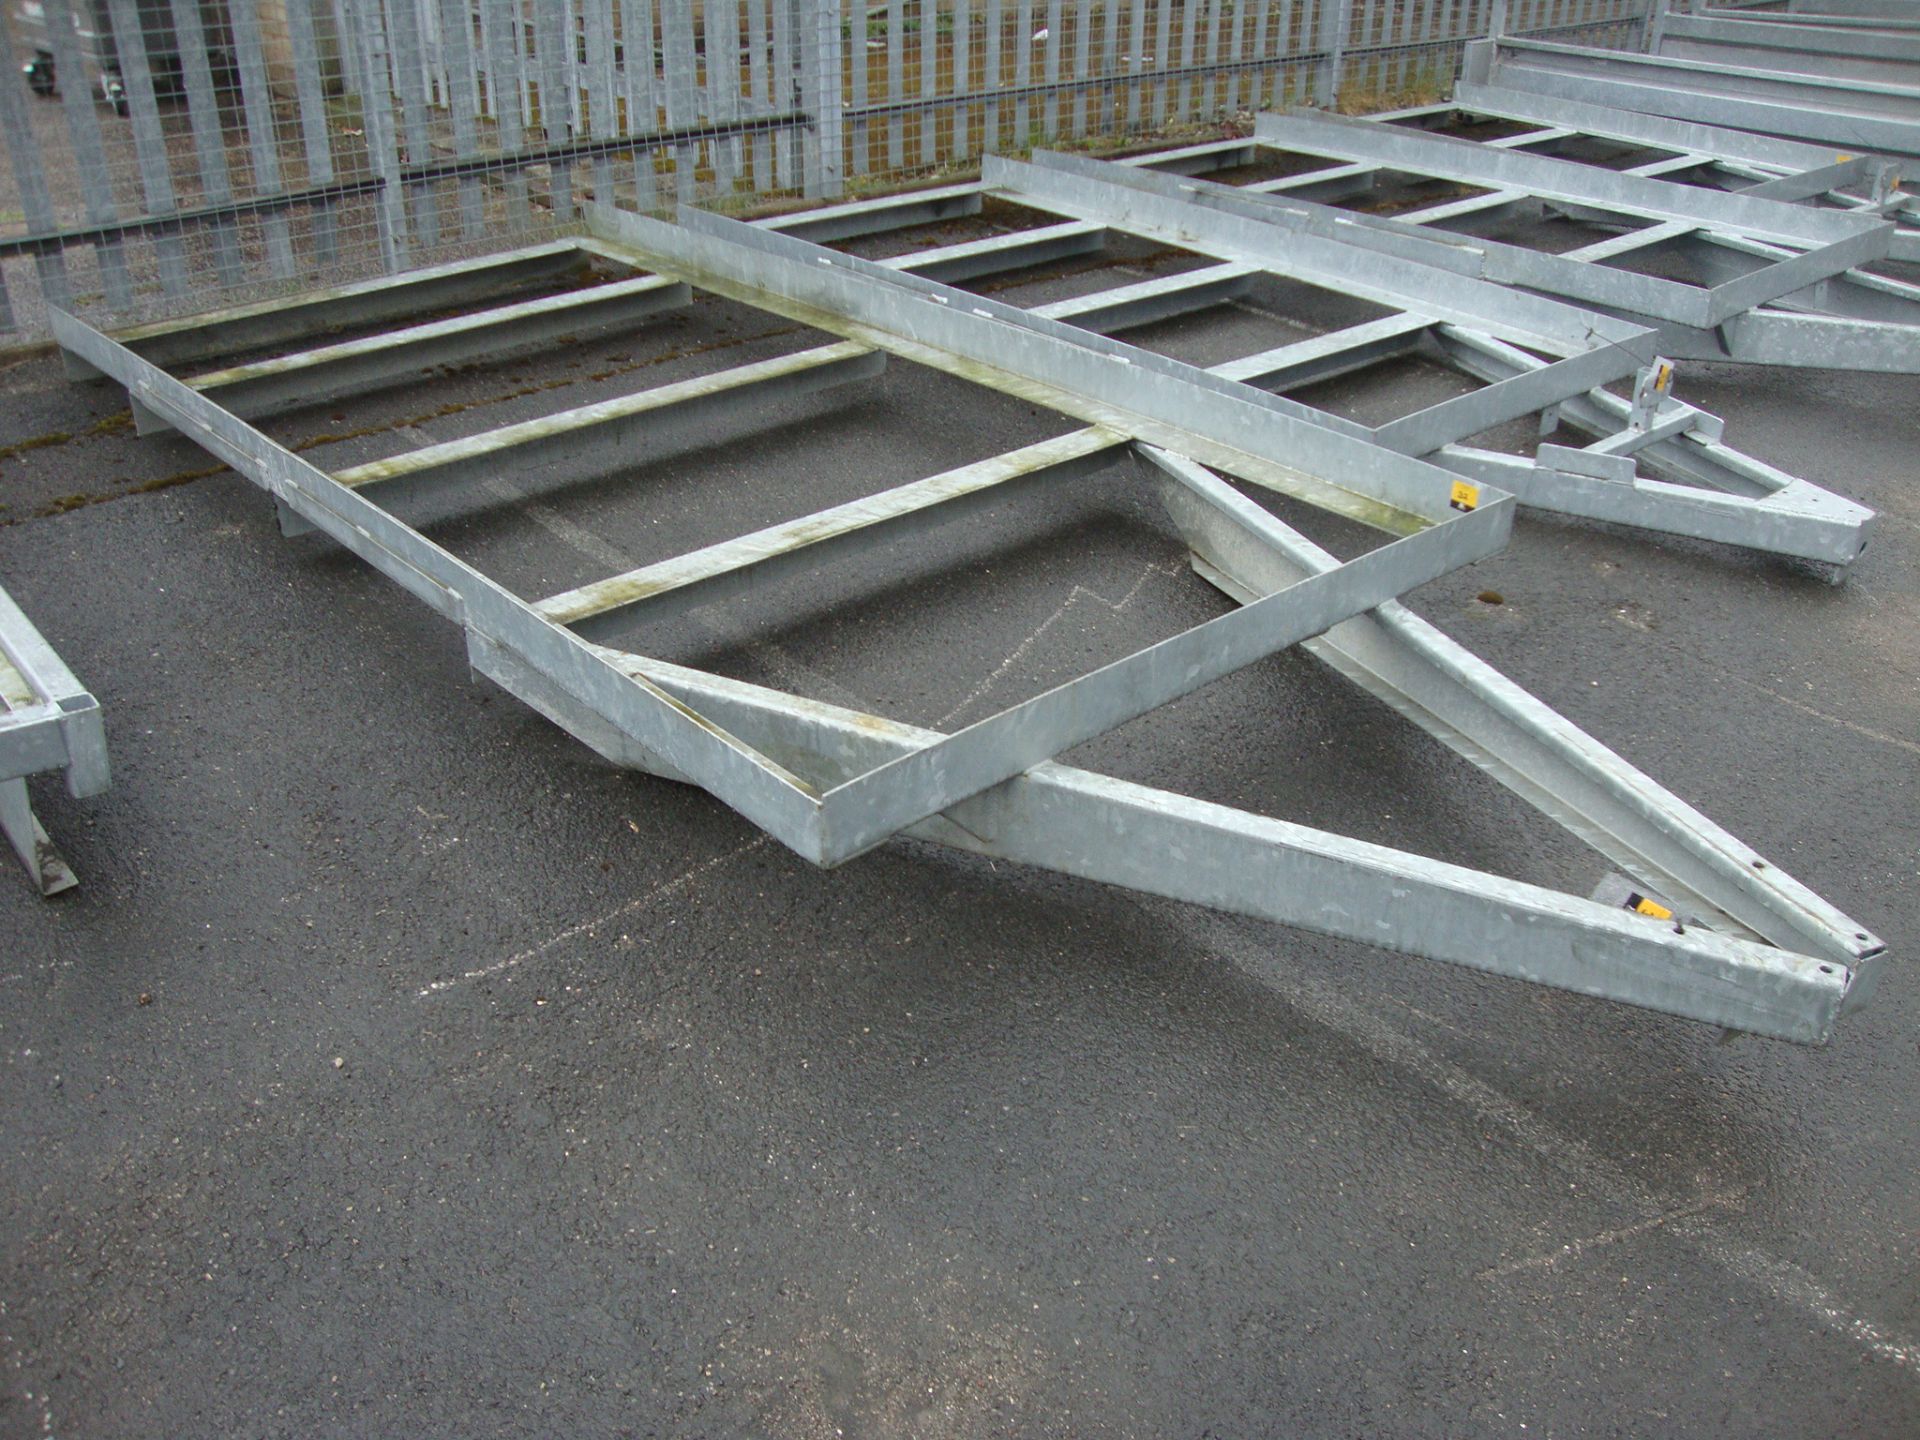 Trailer chassis/frame – galvanised, bed size 303cm (l) x 150cm (w), excluding the A-frame as